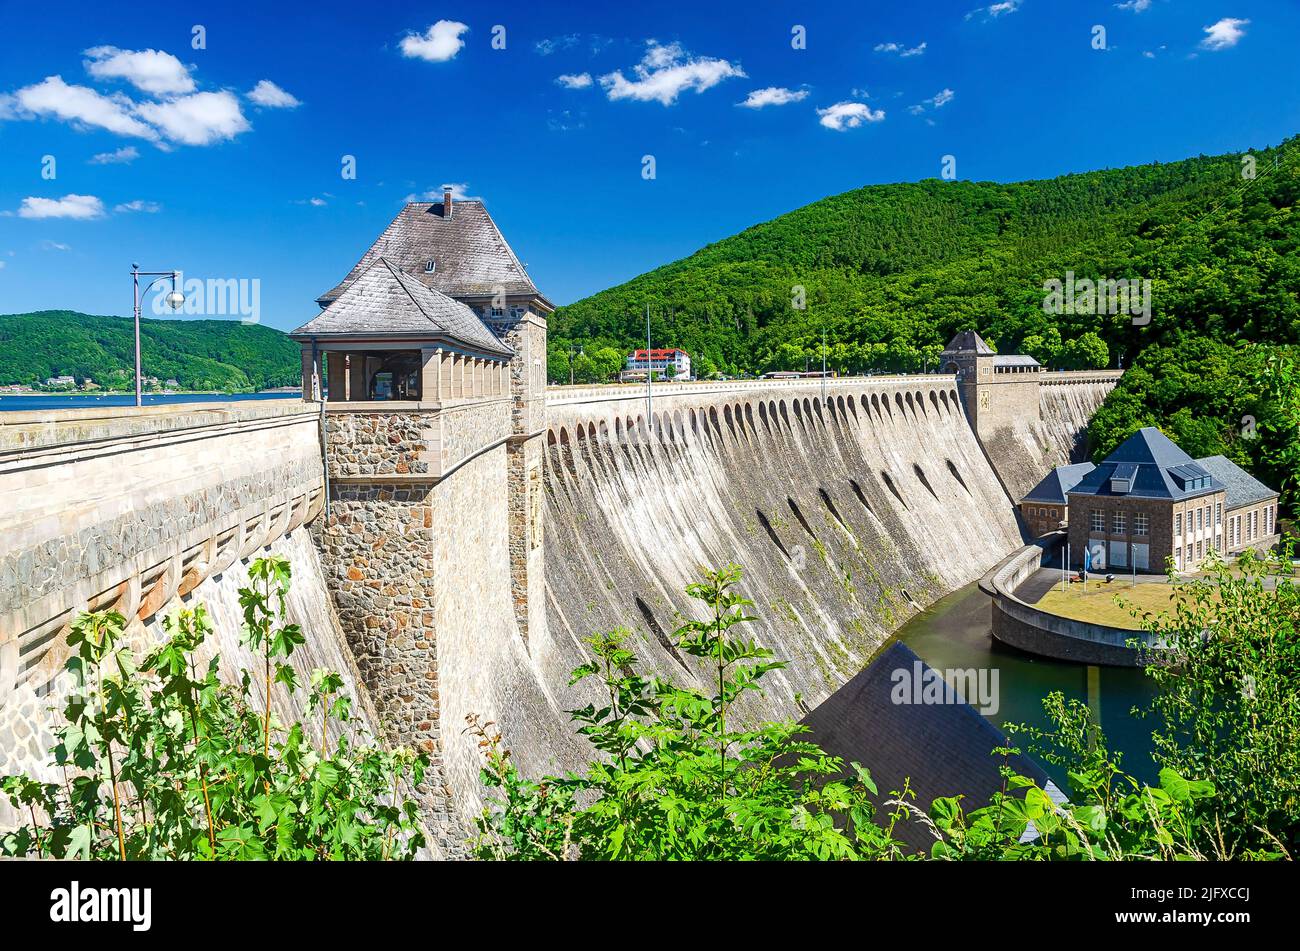 Edersee Dam at the Edersee lake, a famous reservoir in Waldeck-Frankenberg, Hesse, Germany Stock Photo